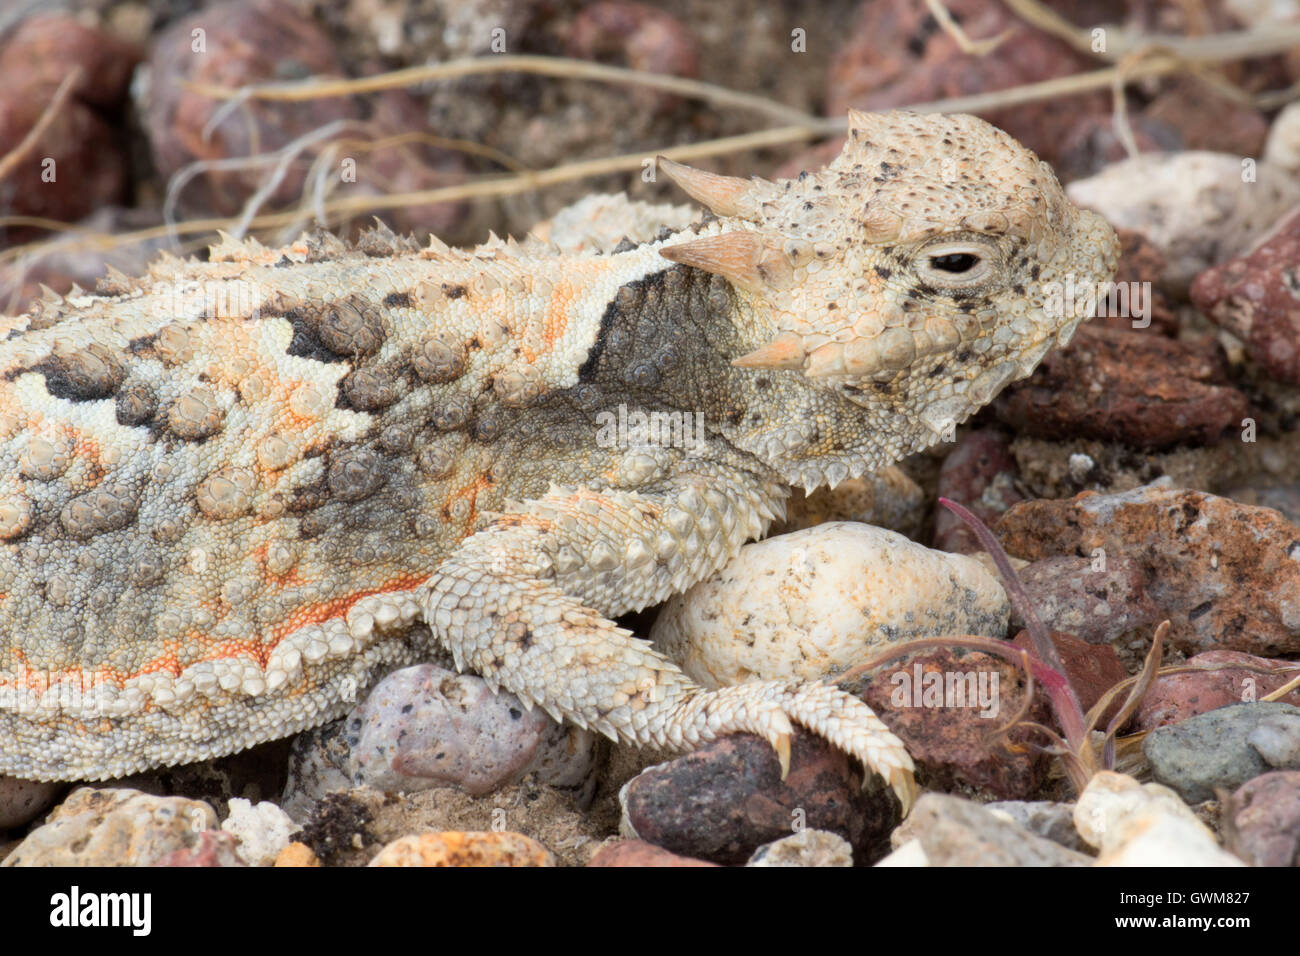 Horned toad, Calico Mountains Wilderness, Black Rock Desert High Rock Canyon Emigrant Trails National Conservation Area, Nevada Stock Photo